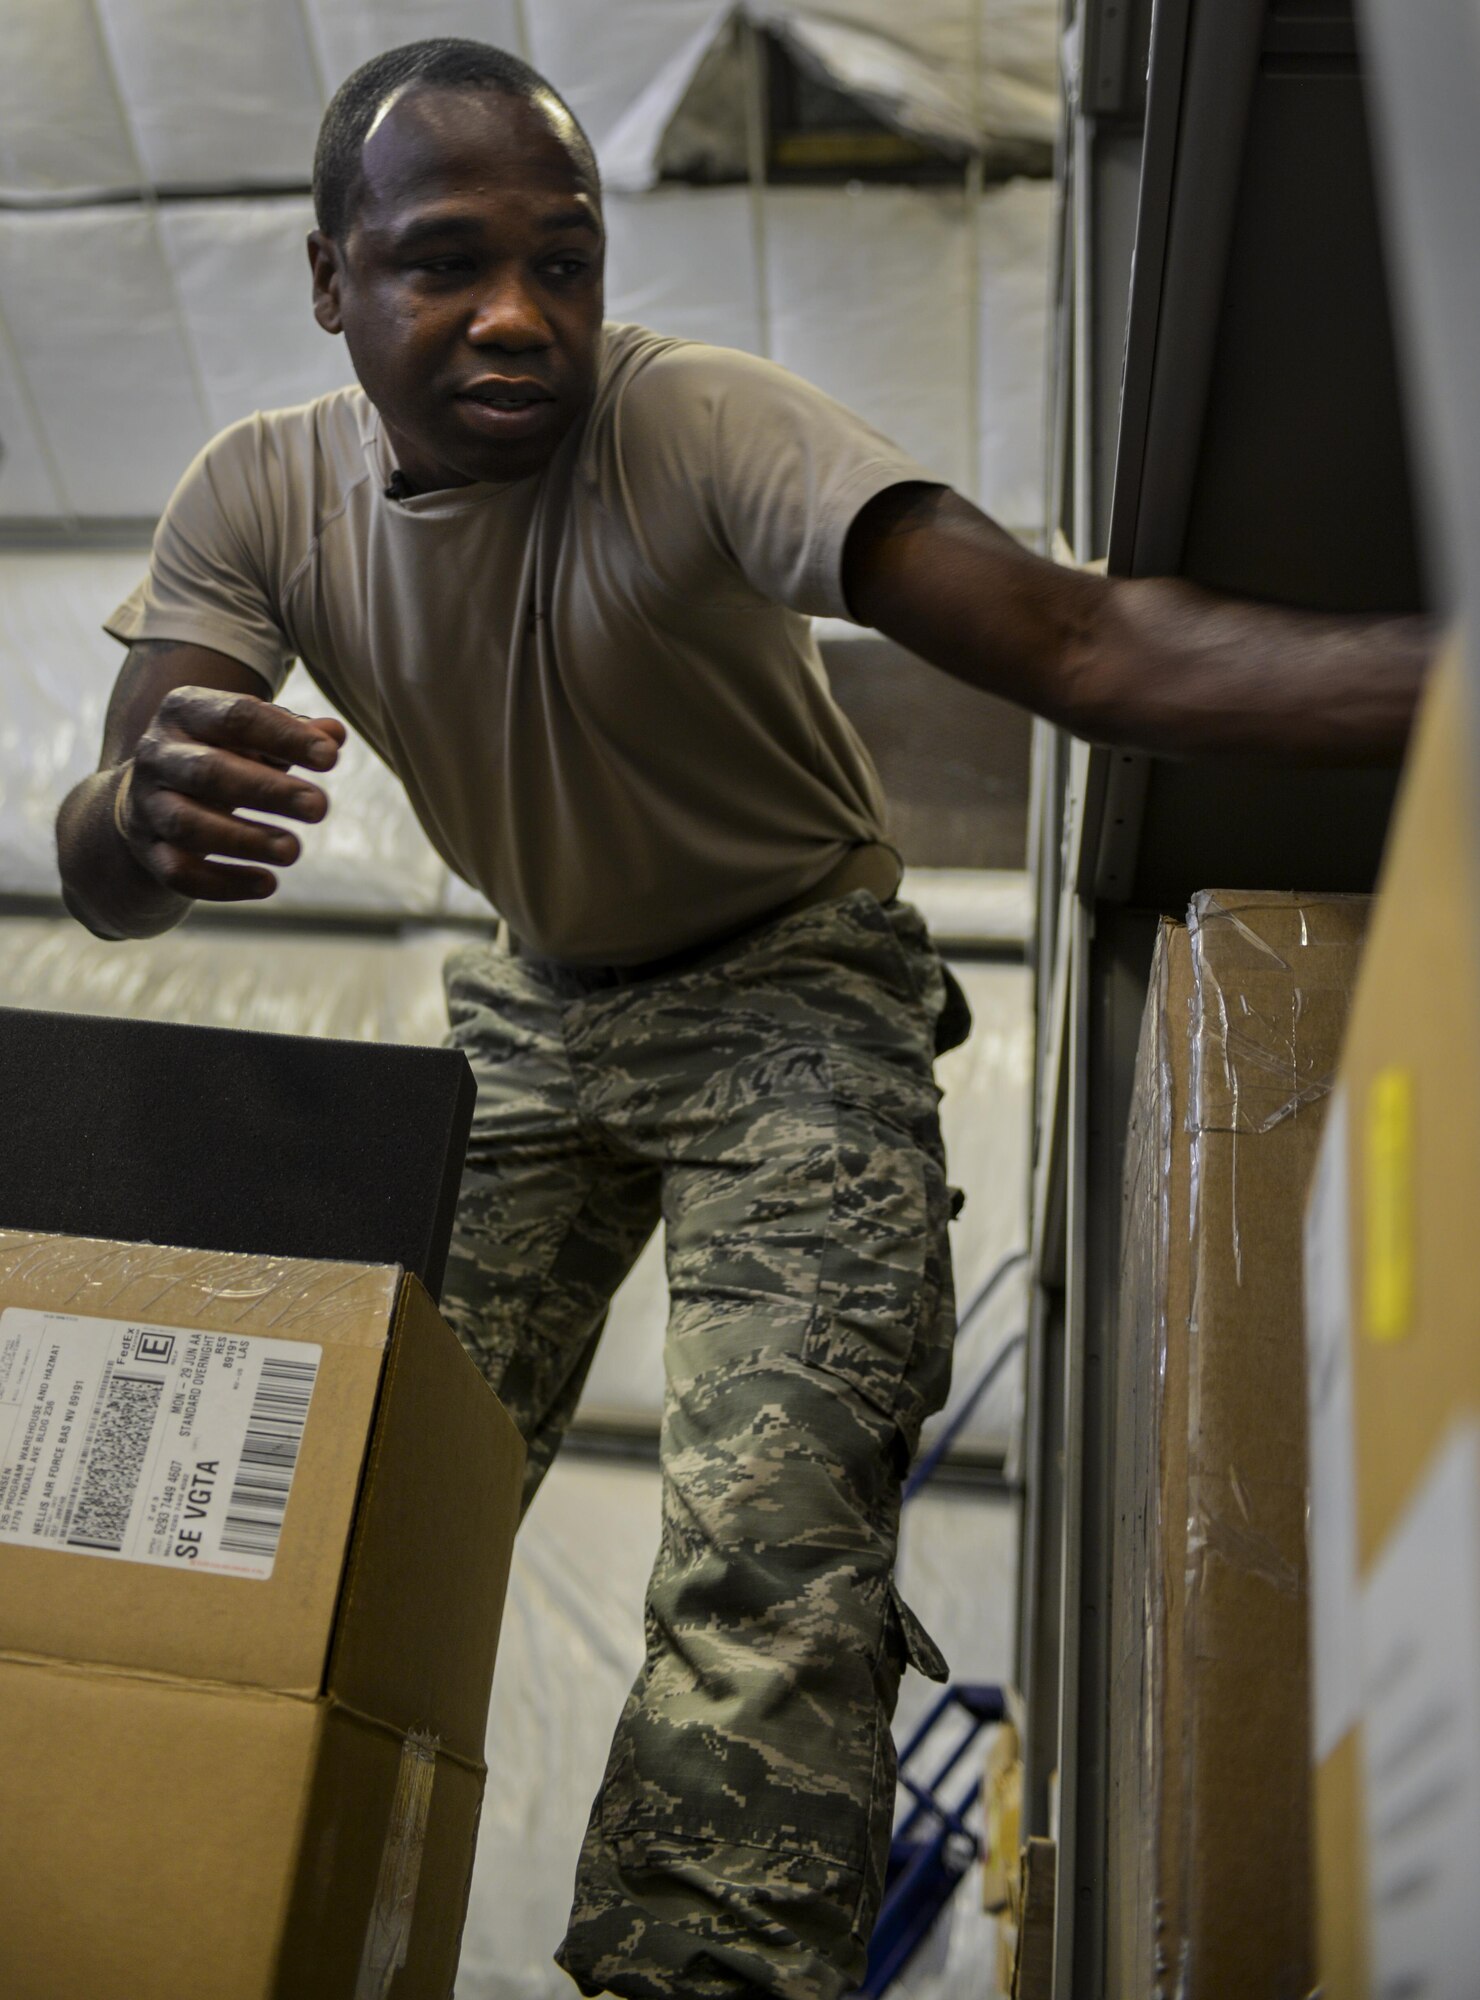 Staff Sgt. Wendell Belford, 99th Logistics Readiness
Squadron F-35 Aircraft Parts Store supervisor, reaches for
a box while preparing to move parts from the old to the
new location, at Nellis Air Force Base, Nev., June 6. The
amenities that the new facility provides will allow the
Airmen of the F-35 parts shop to accomplish their missions,
and with the growth of the F-35 program increasing in size
the 99th LRS had to follow suit. (U.S. Air Force photo by Airman 1st Class Kevin Tanenbaum)